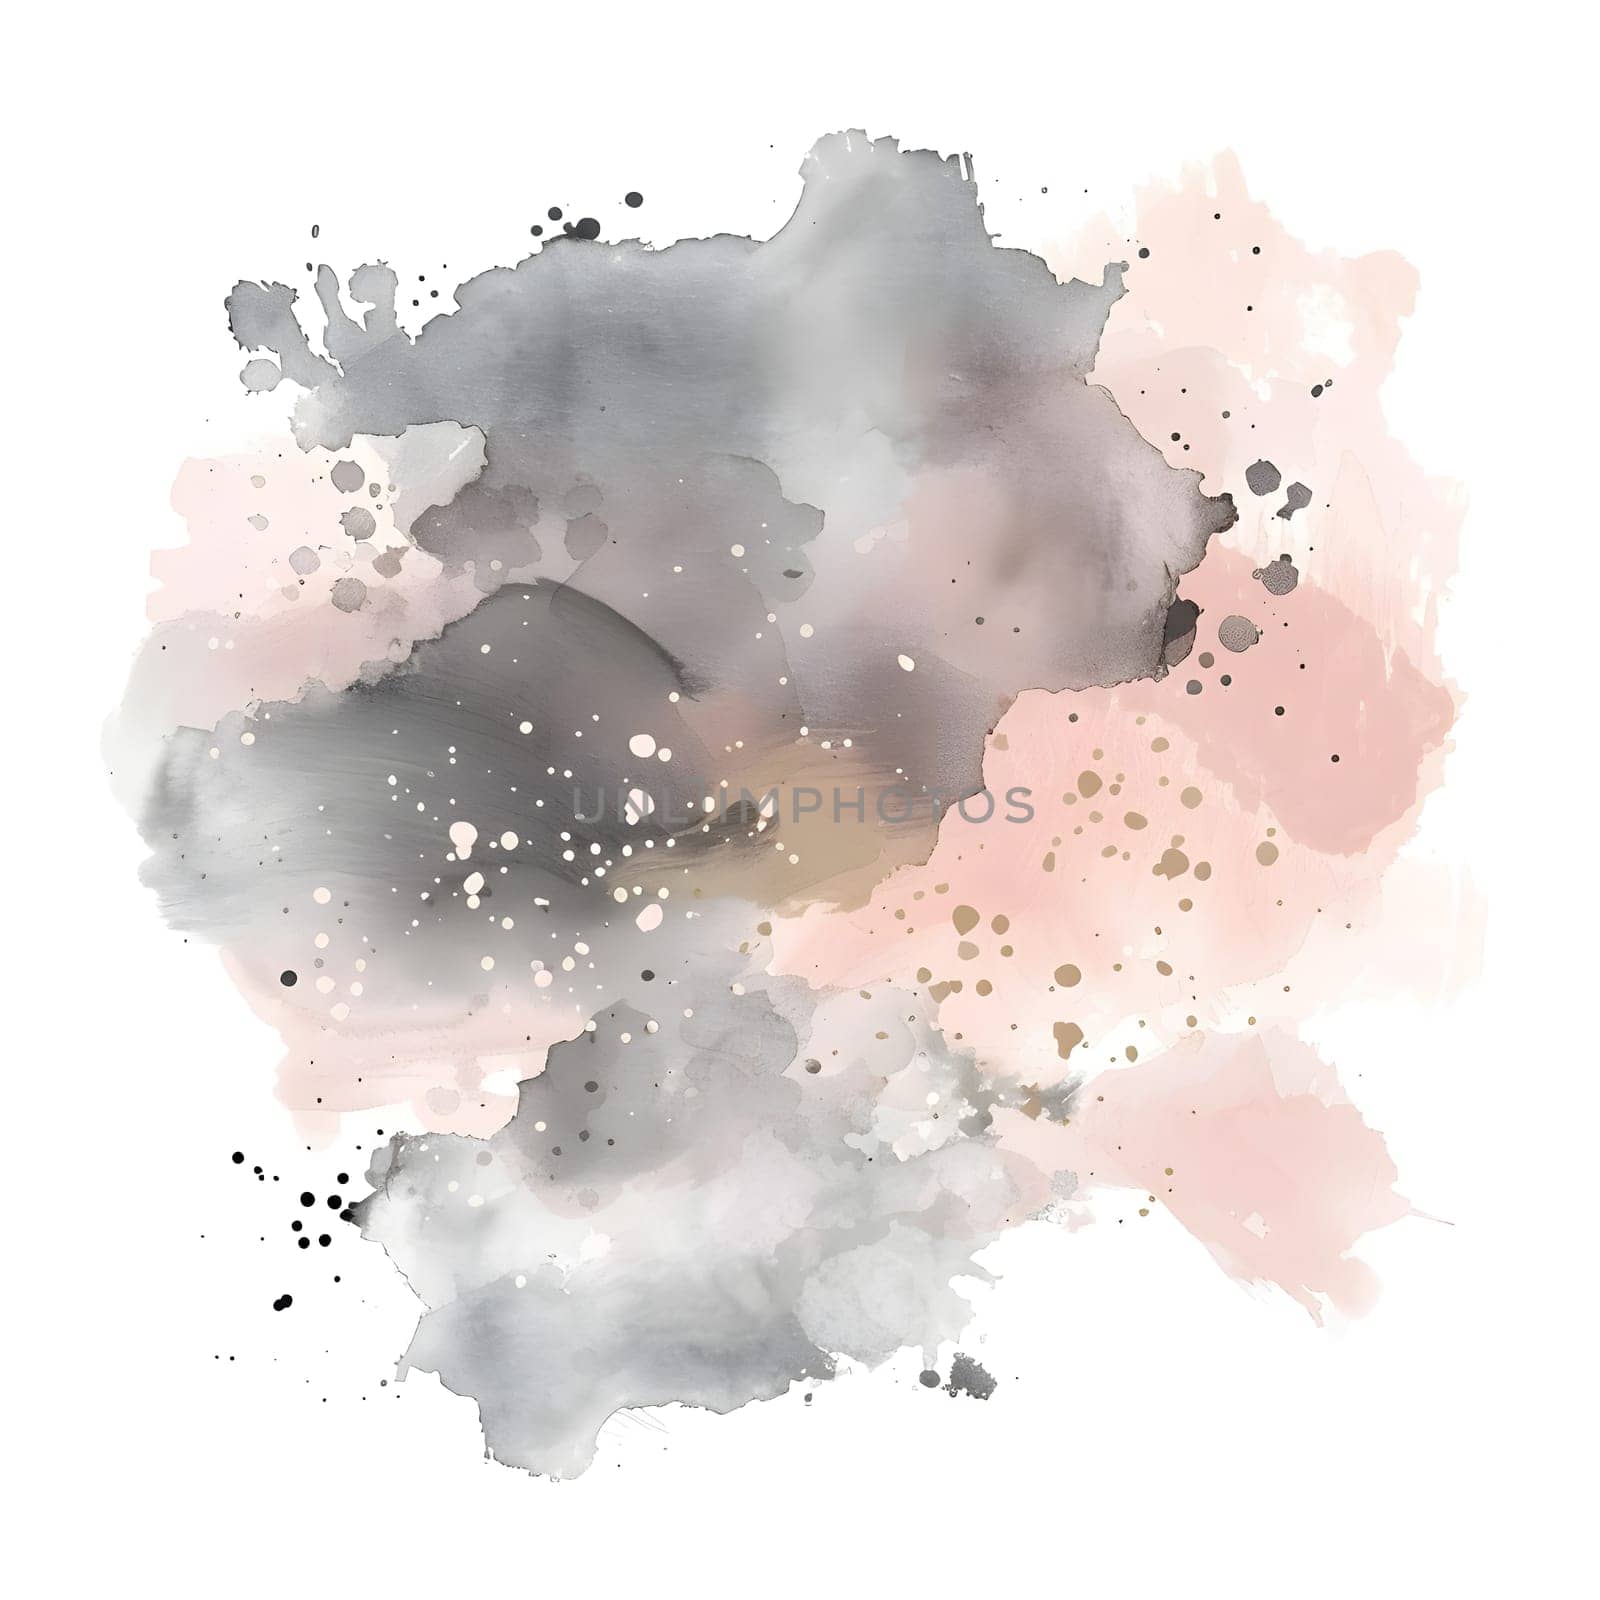 Watercolor art with gray and pink splash on white background by Nadtochiy